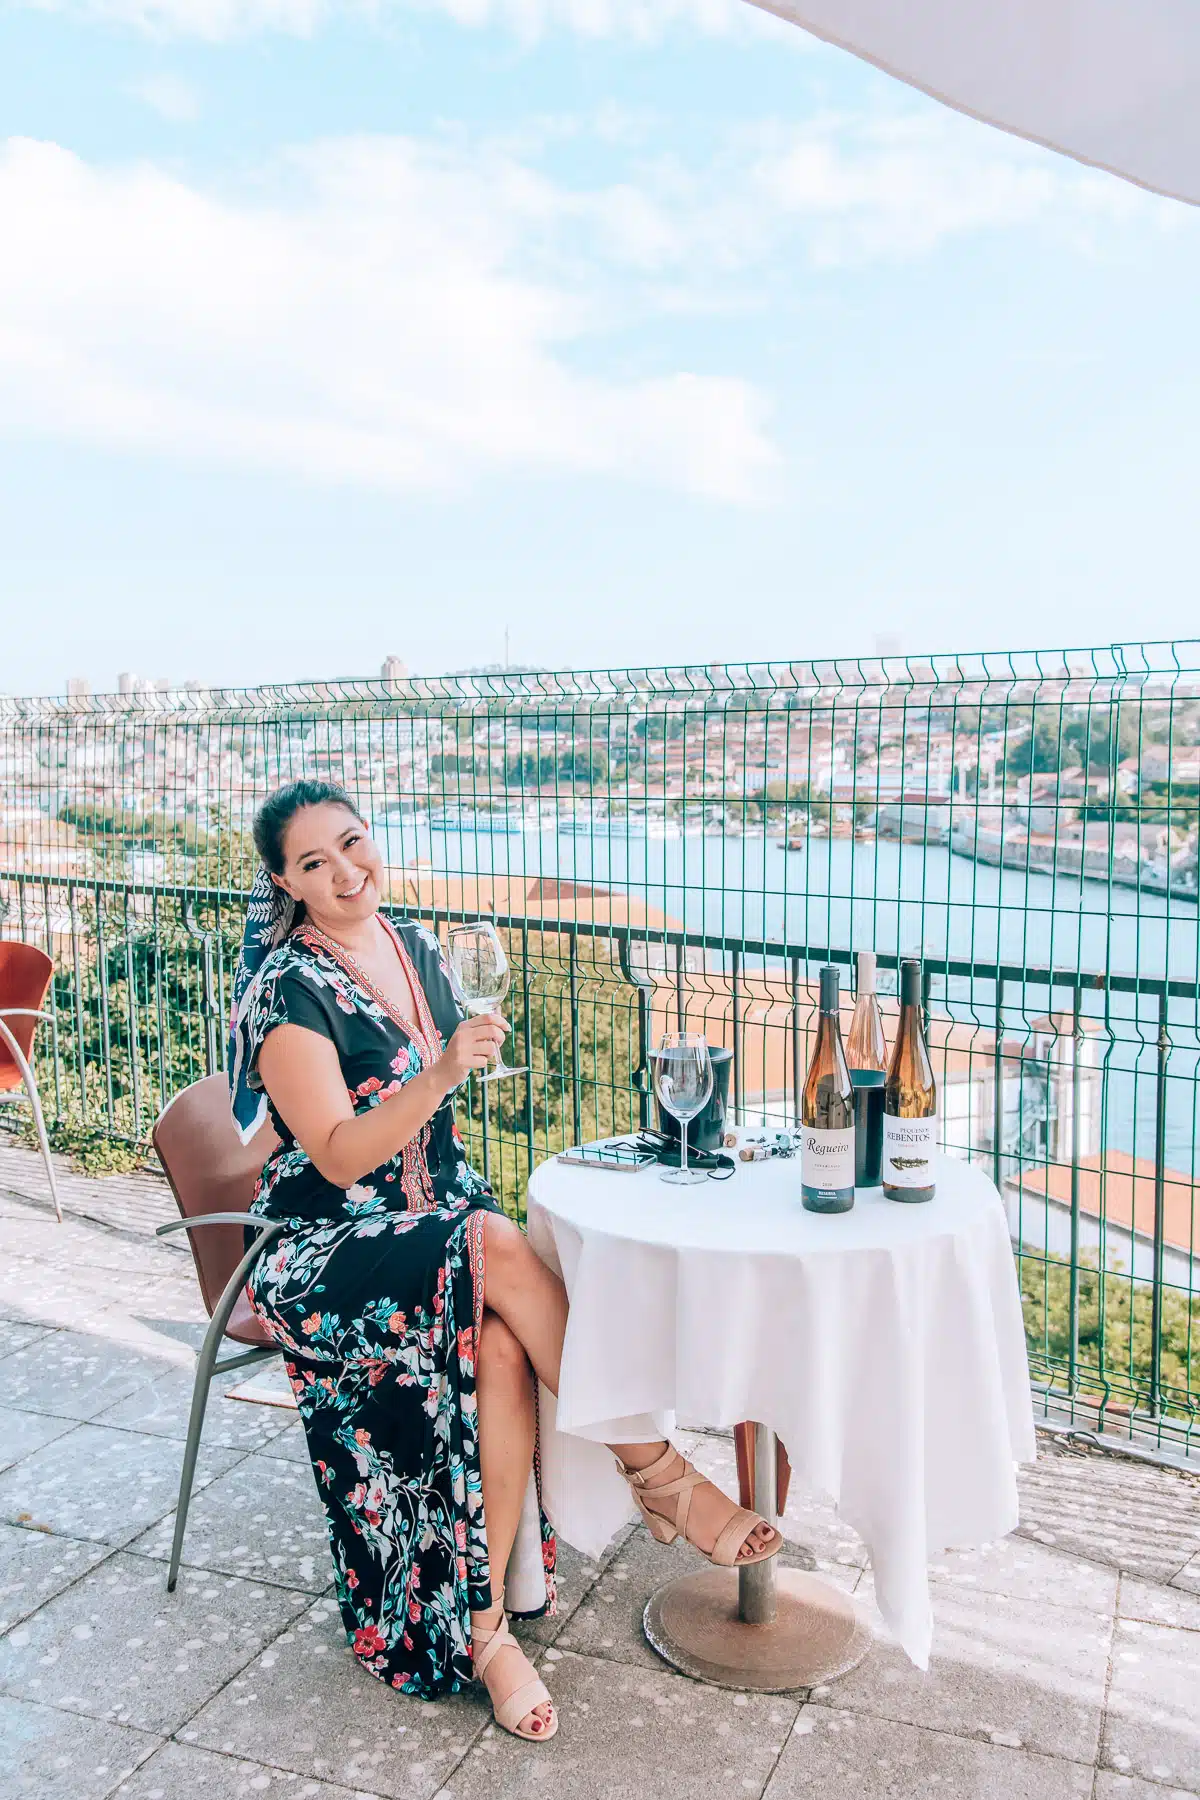 Minho Portugal wine tasting itinerary, by travel blogger What The Fab